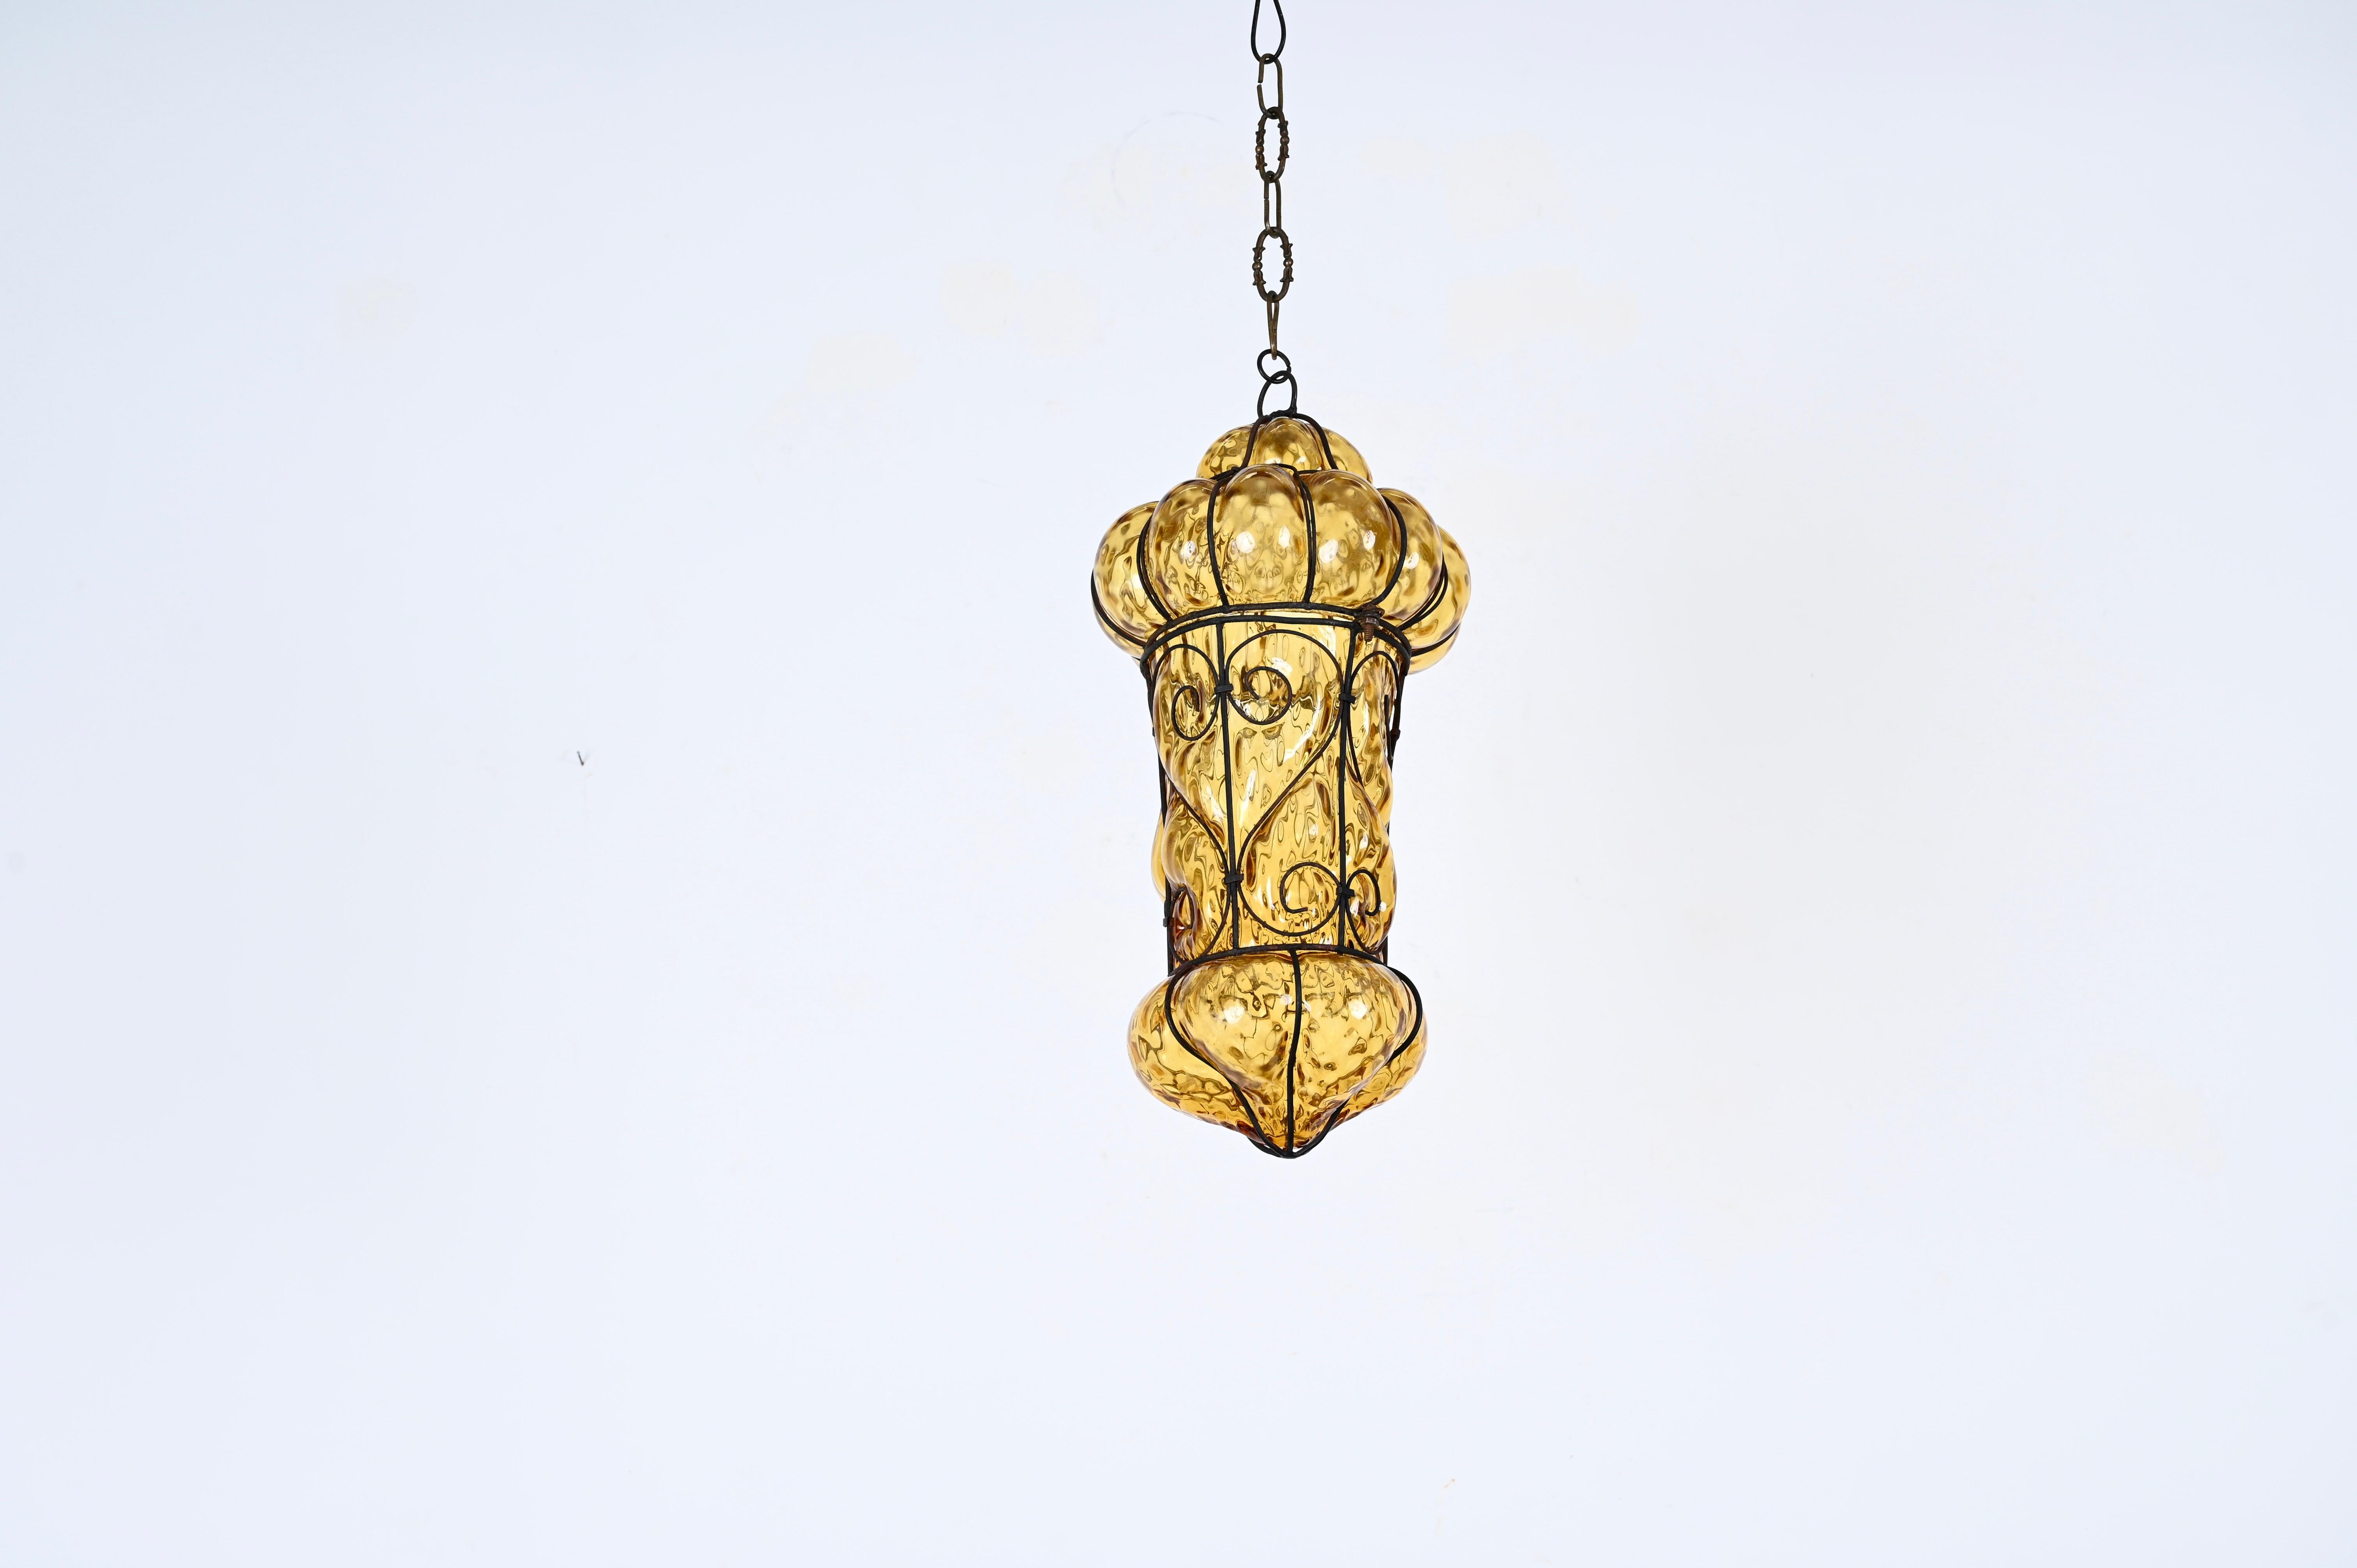 Fantastic Murano mouthblown amber glass chandelier with iron frame. Giorgio Seguso probably designed this wonderful piece in Venice,Italy during the 1940s.

This unique Venetian Murano glass bubble cage pendant has an oriental style and a 